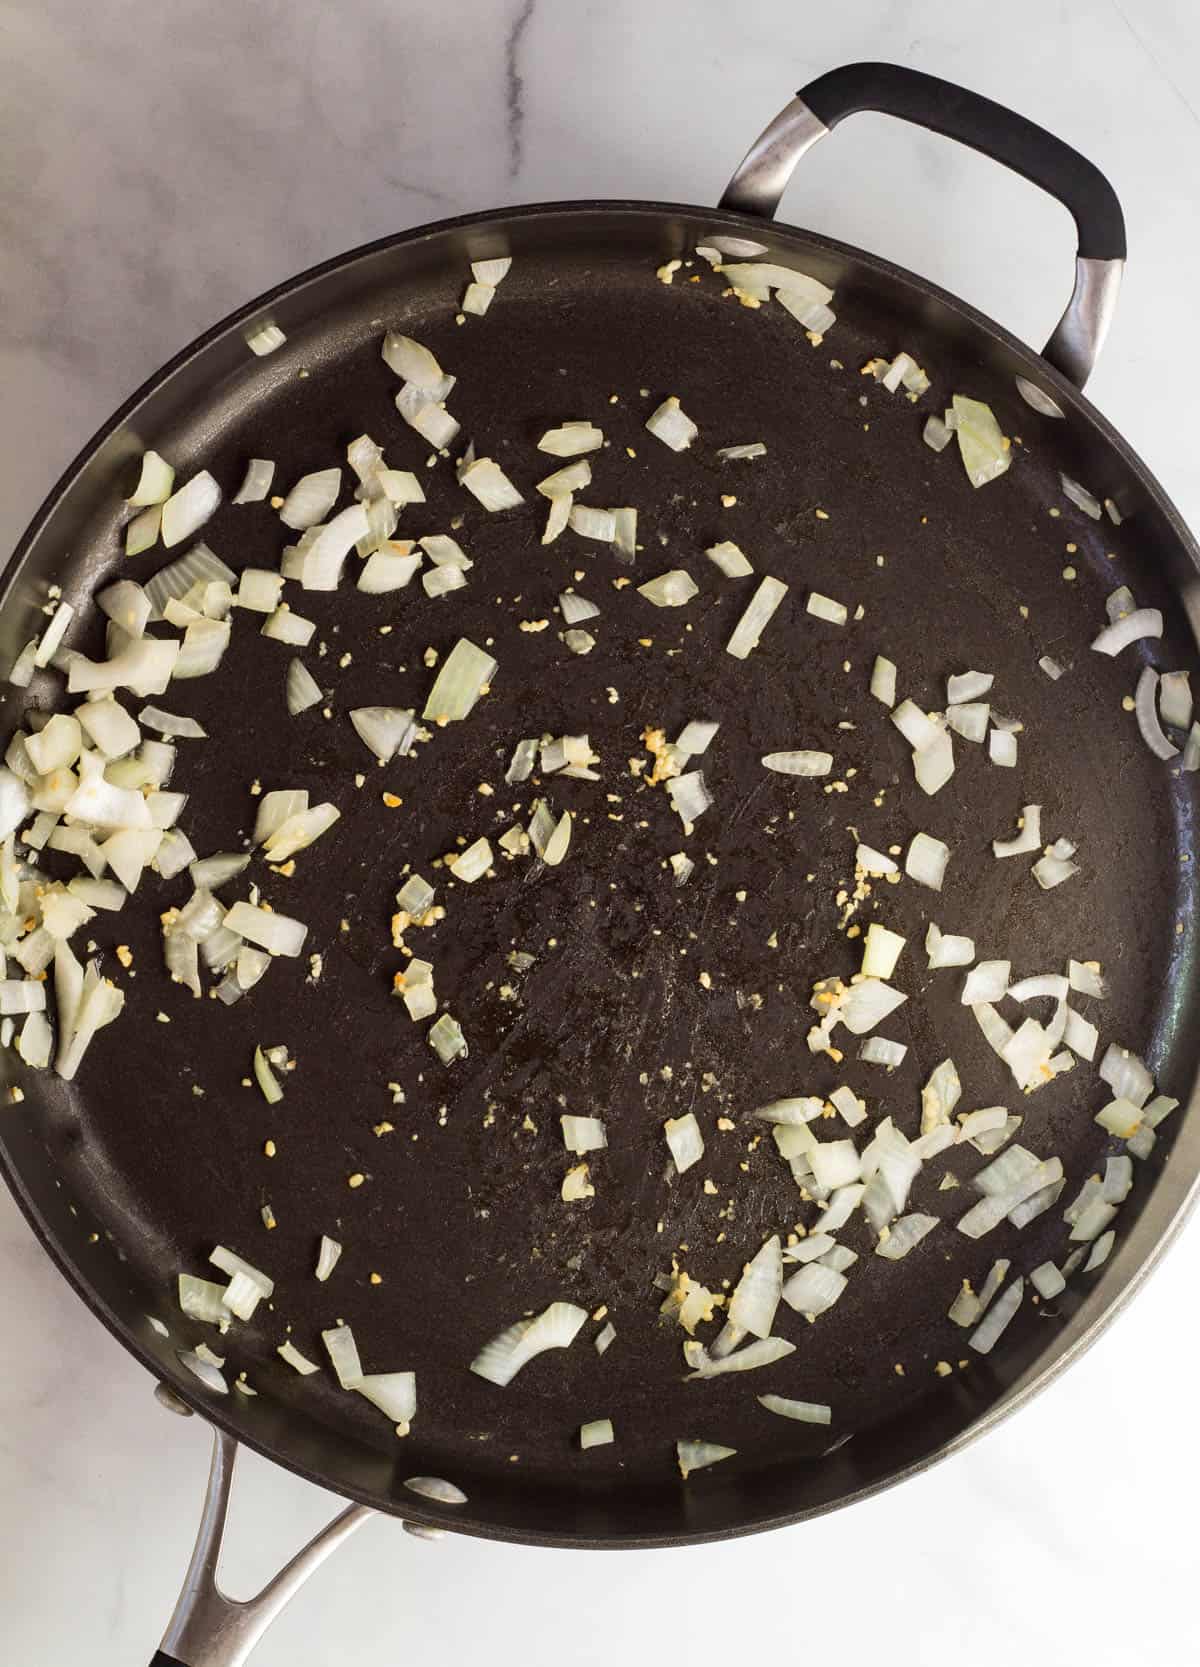 onions and garlic in skillet